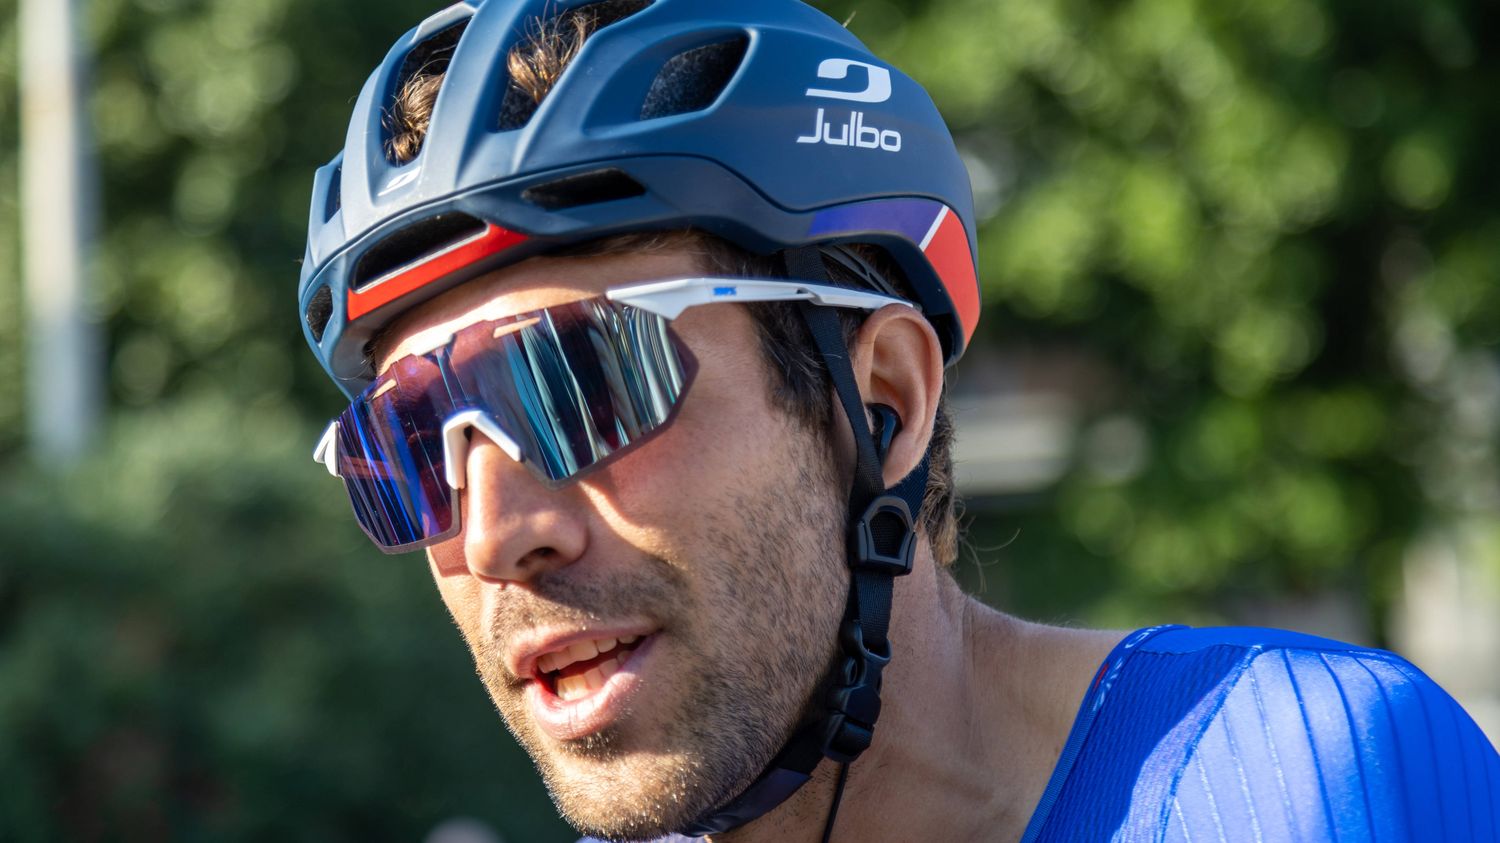 VIDEO.  Cycling: Thibaut Pinot's last dance at the Tour of Lombardy